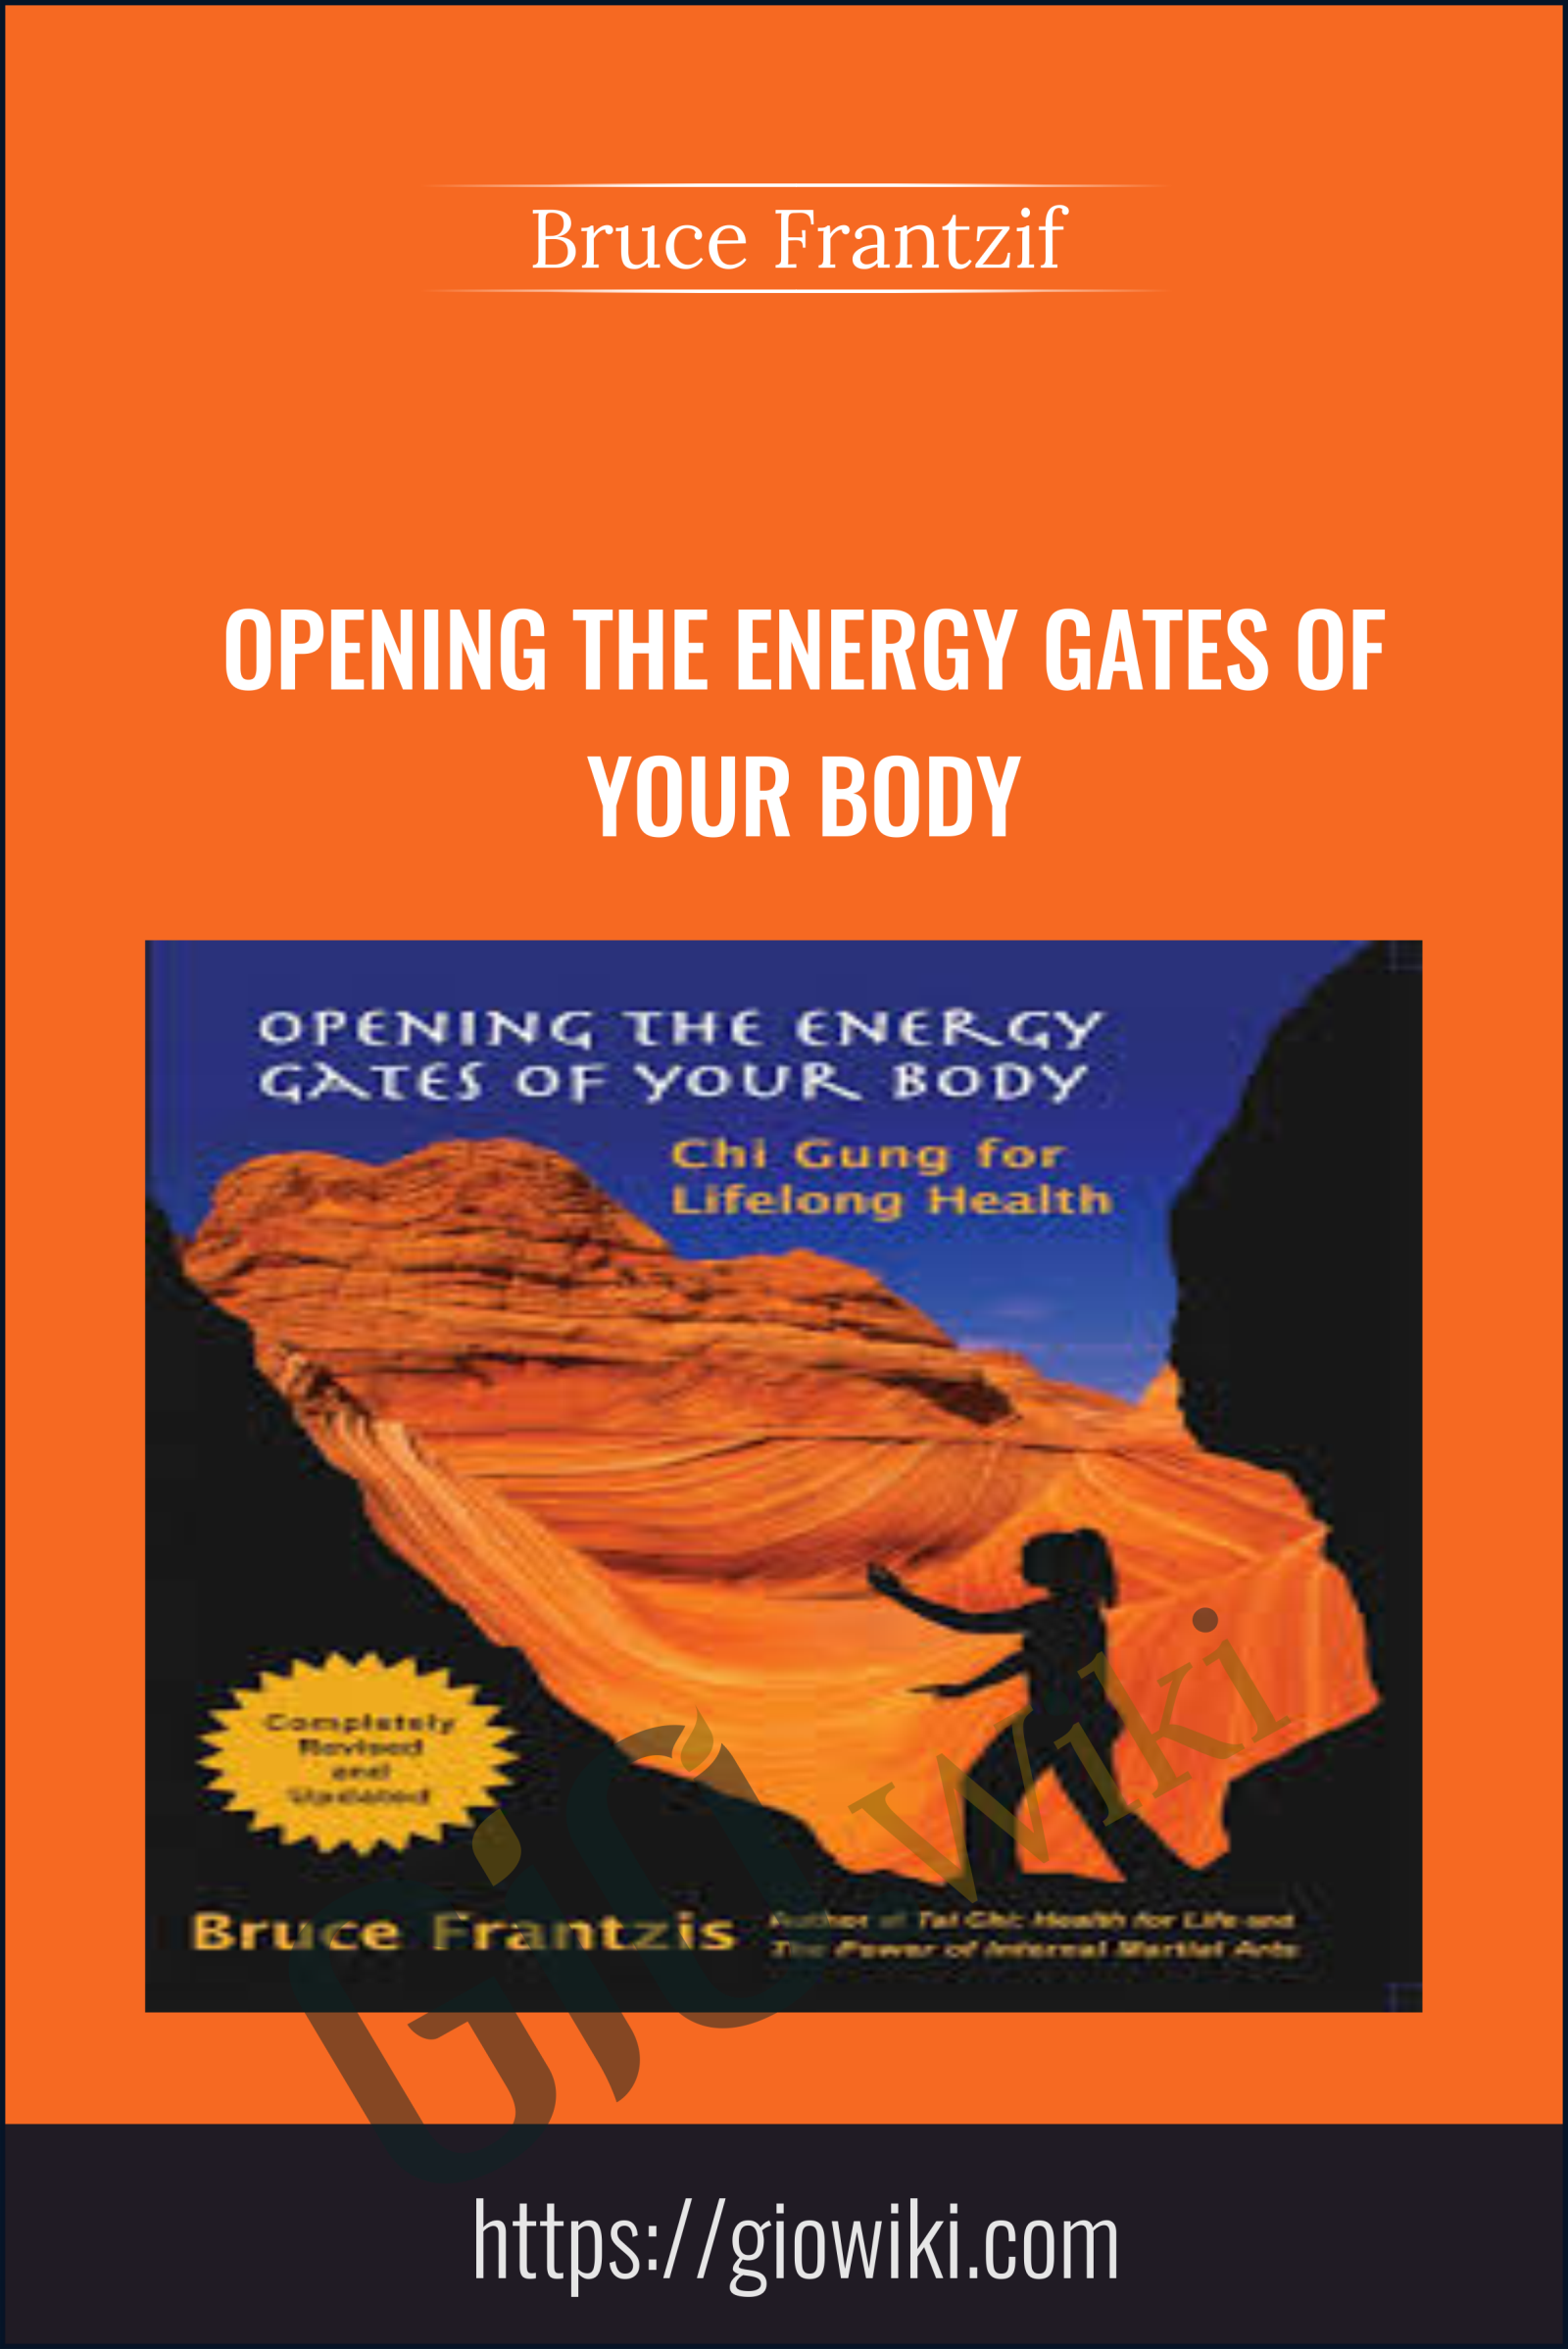 Opening The Energy Gates Of Your Body - Bruce Frantzif